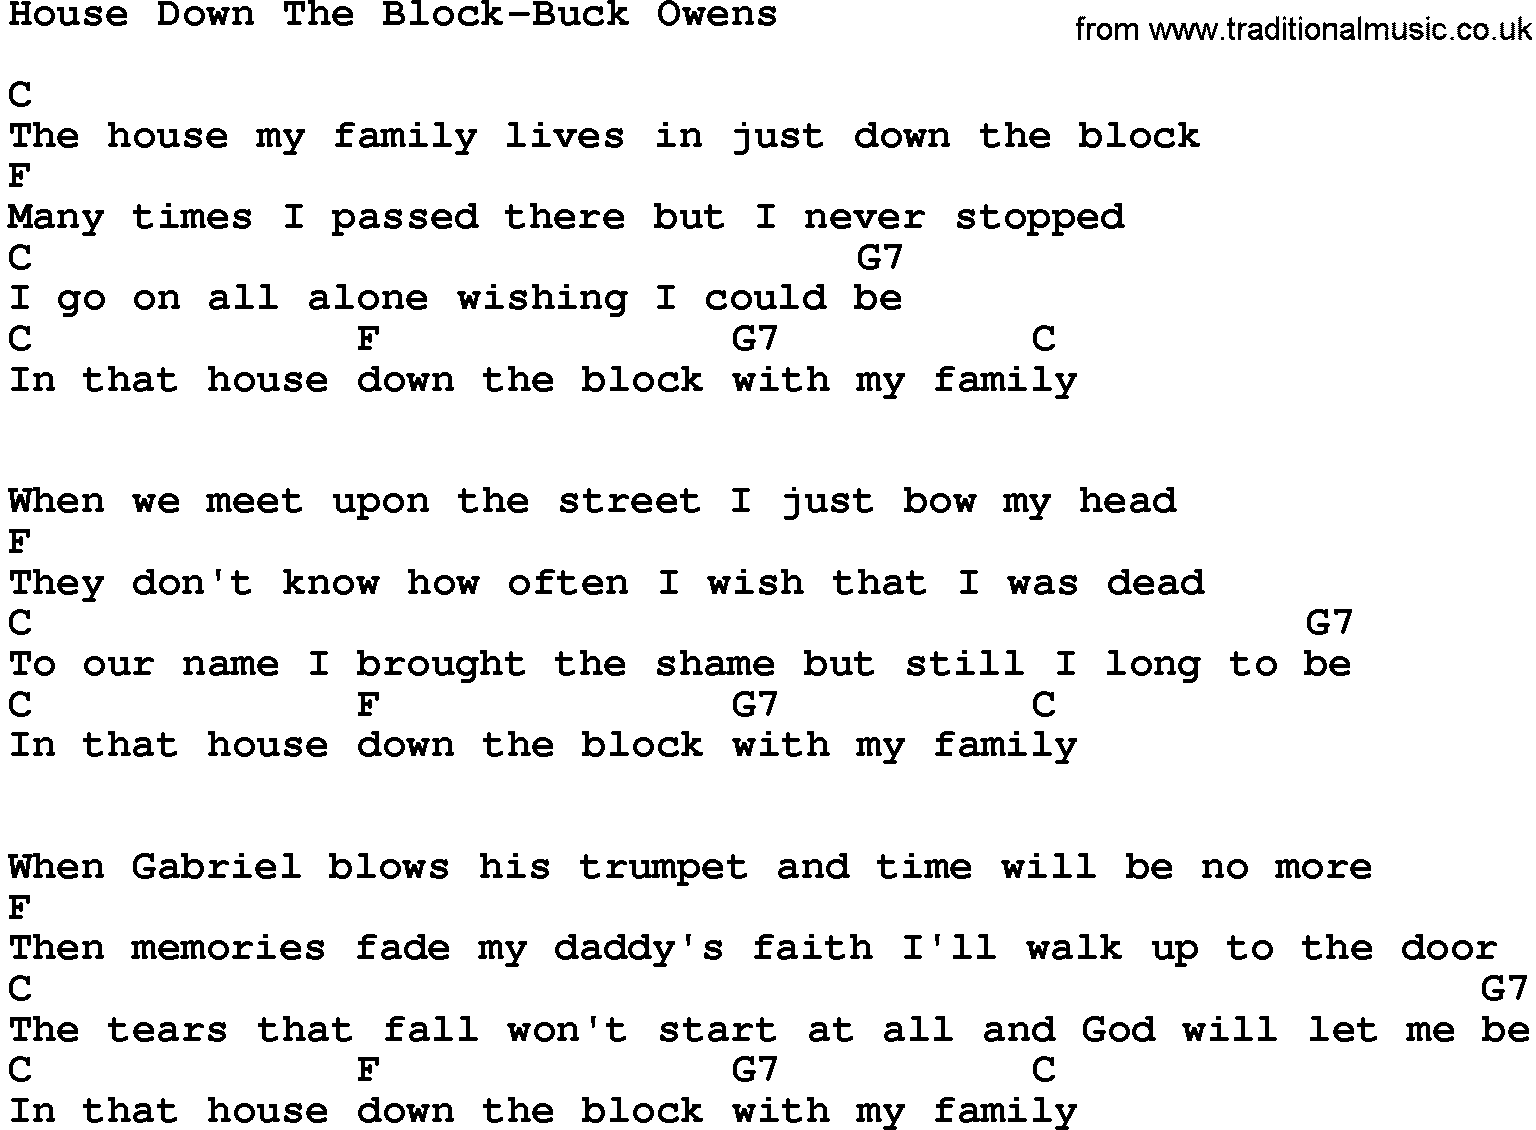 Country music song: House Down The Block-Buck Owens lyrics and chords